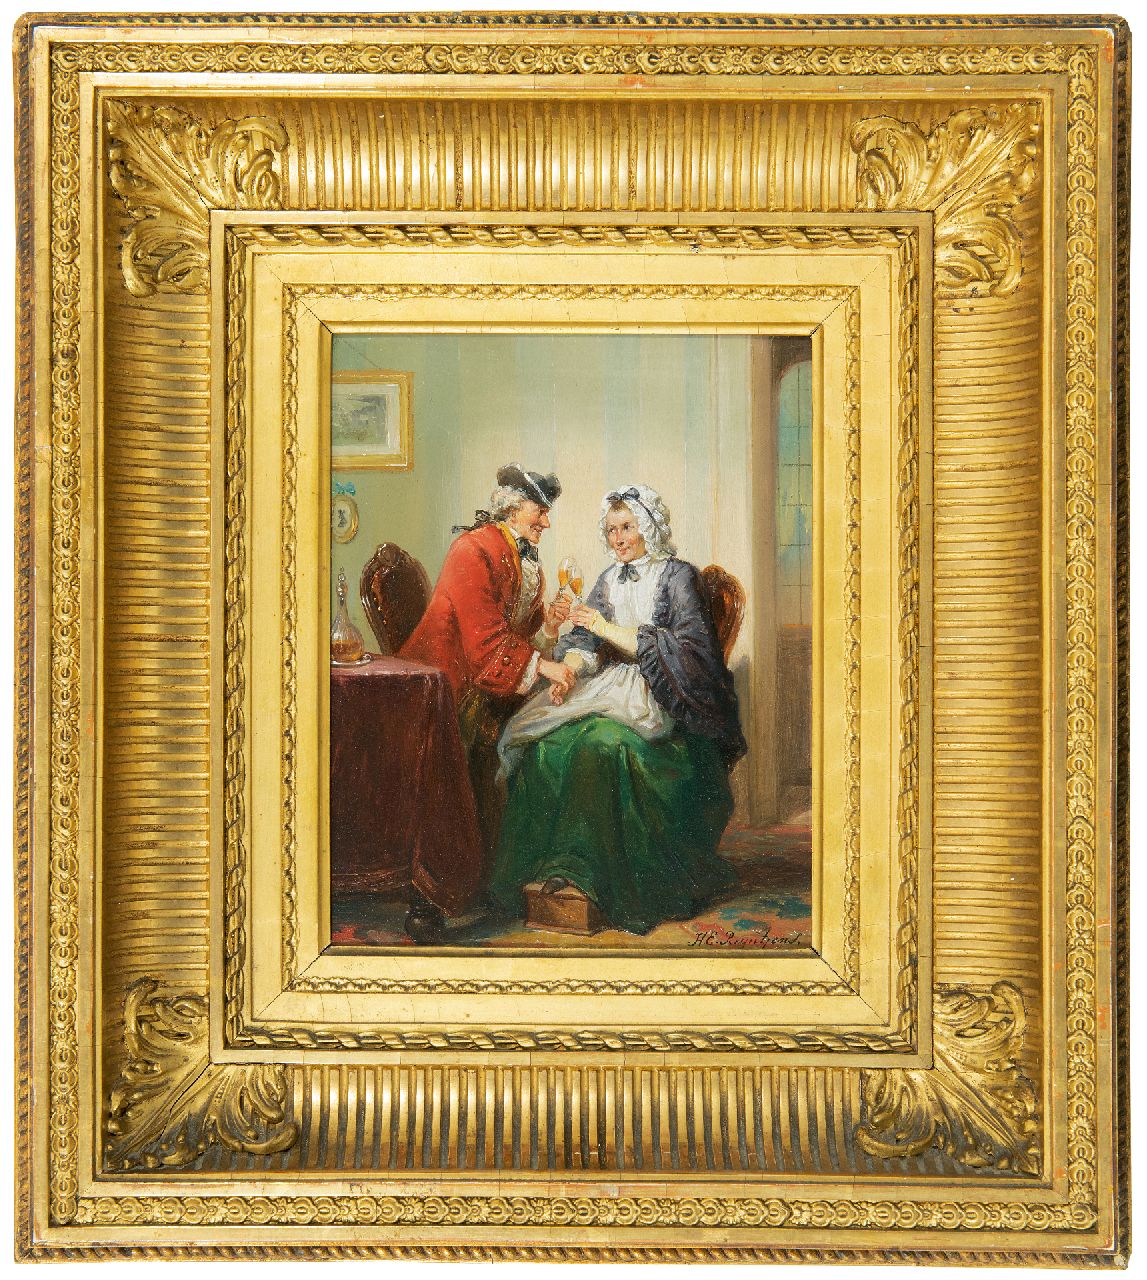 Reijntjens H.E.  | Henricus Engelbertus Reijntjens | Paintings offered for sale | The sealing of the marriage proposal, oil on panel 19.3 x 15.1 cm, signed l.r.